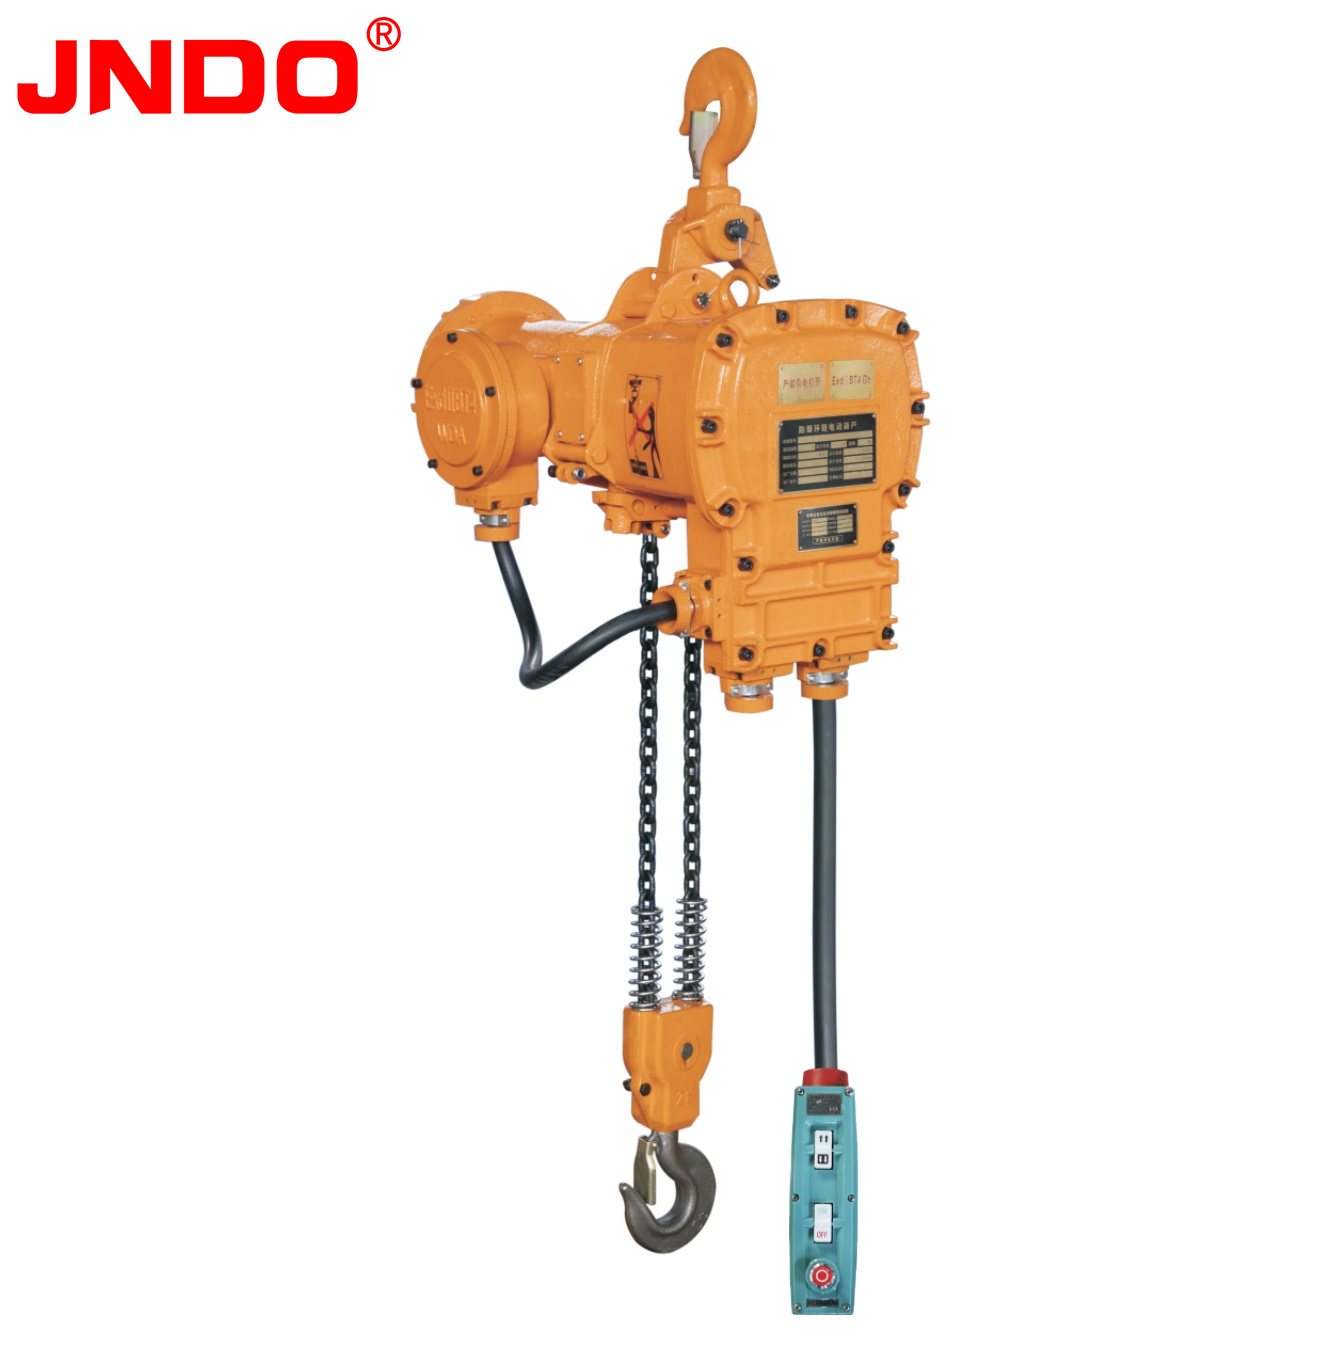 EXPLOSION-PROOF ELECTRIC CHAIN HOIST